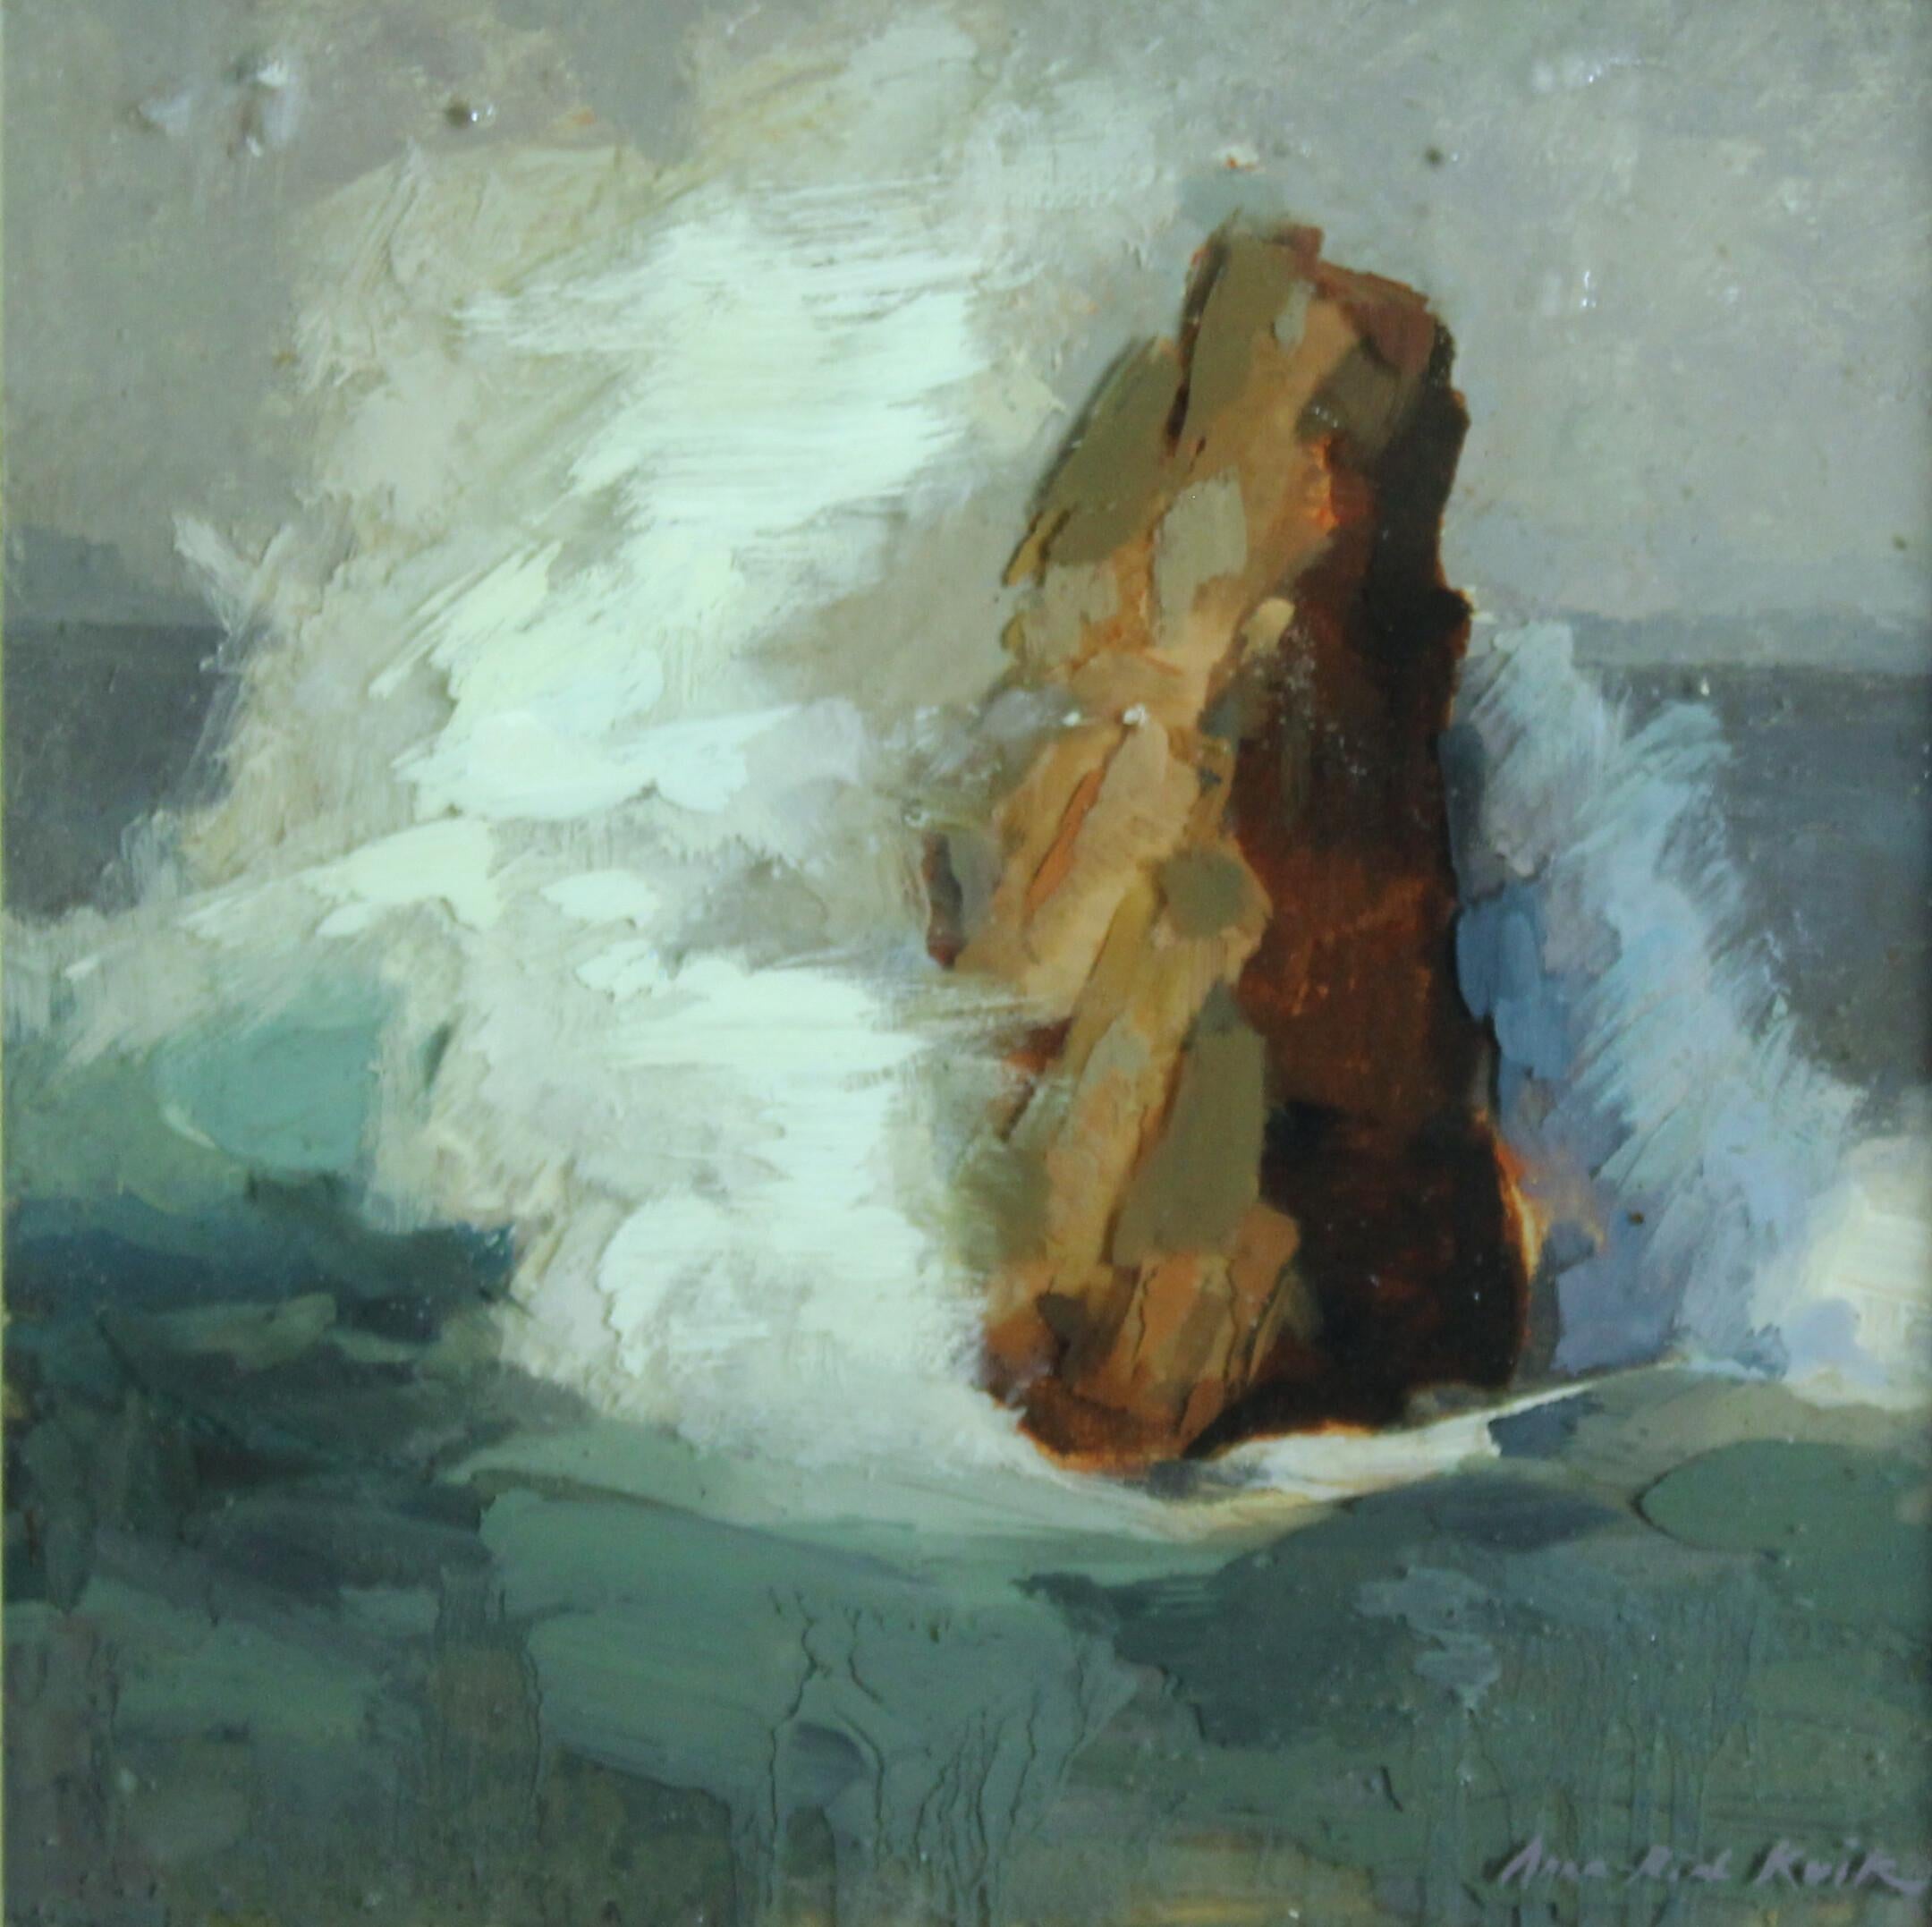 Anne-Rixt Kuik Figurative Painting - Rock In The Sea - 21st Century Contemporary Painting On Epoxy Resin